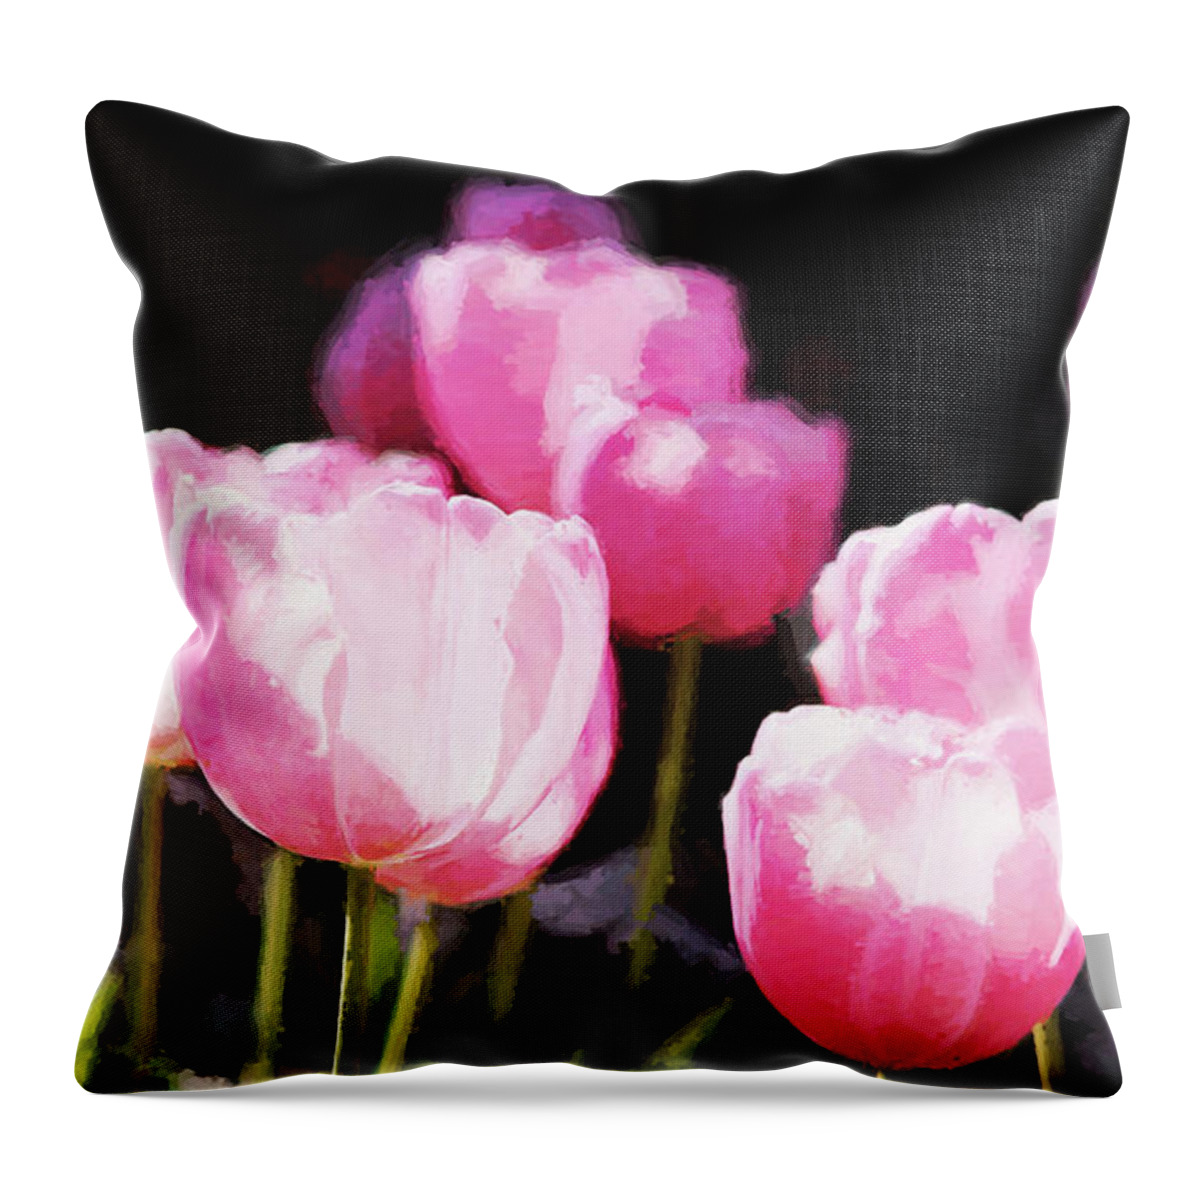 Tulips Throw Pillow featuring the photograph Pink Tulips by Reynaldo Williams